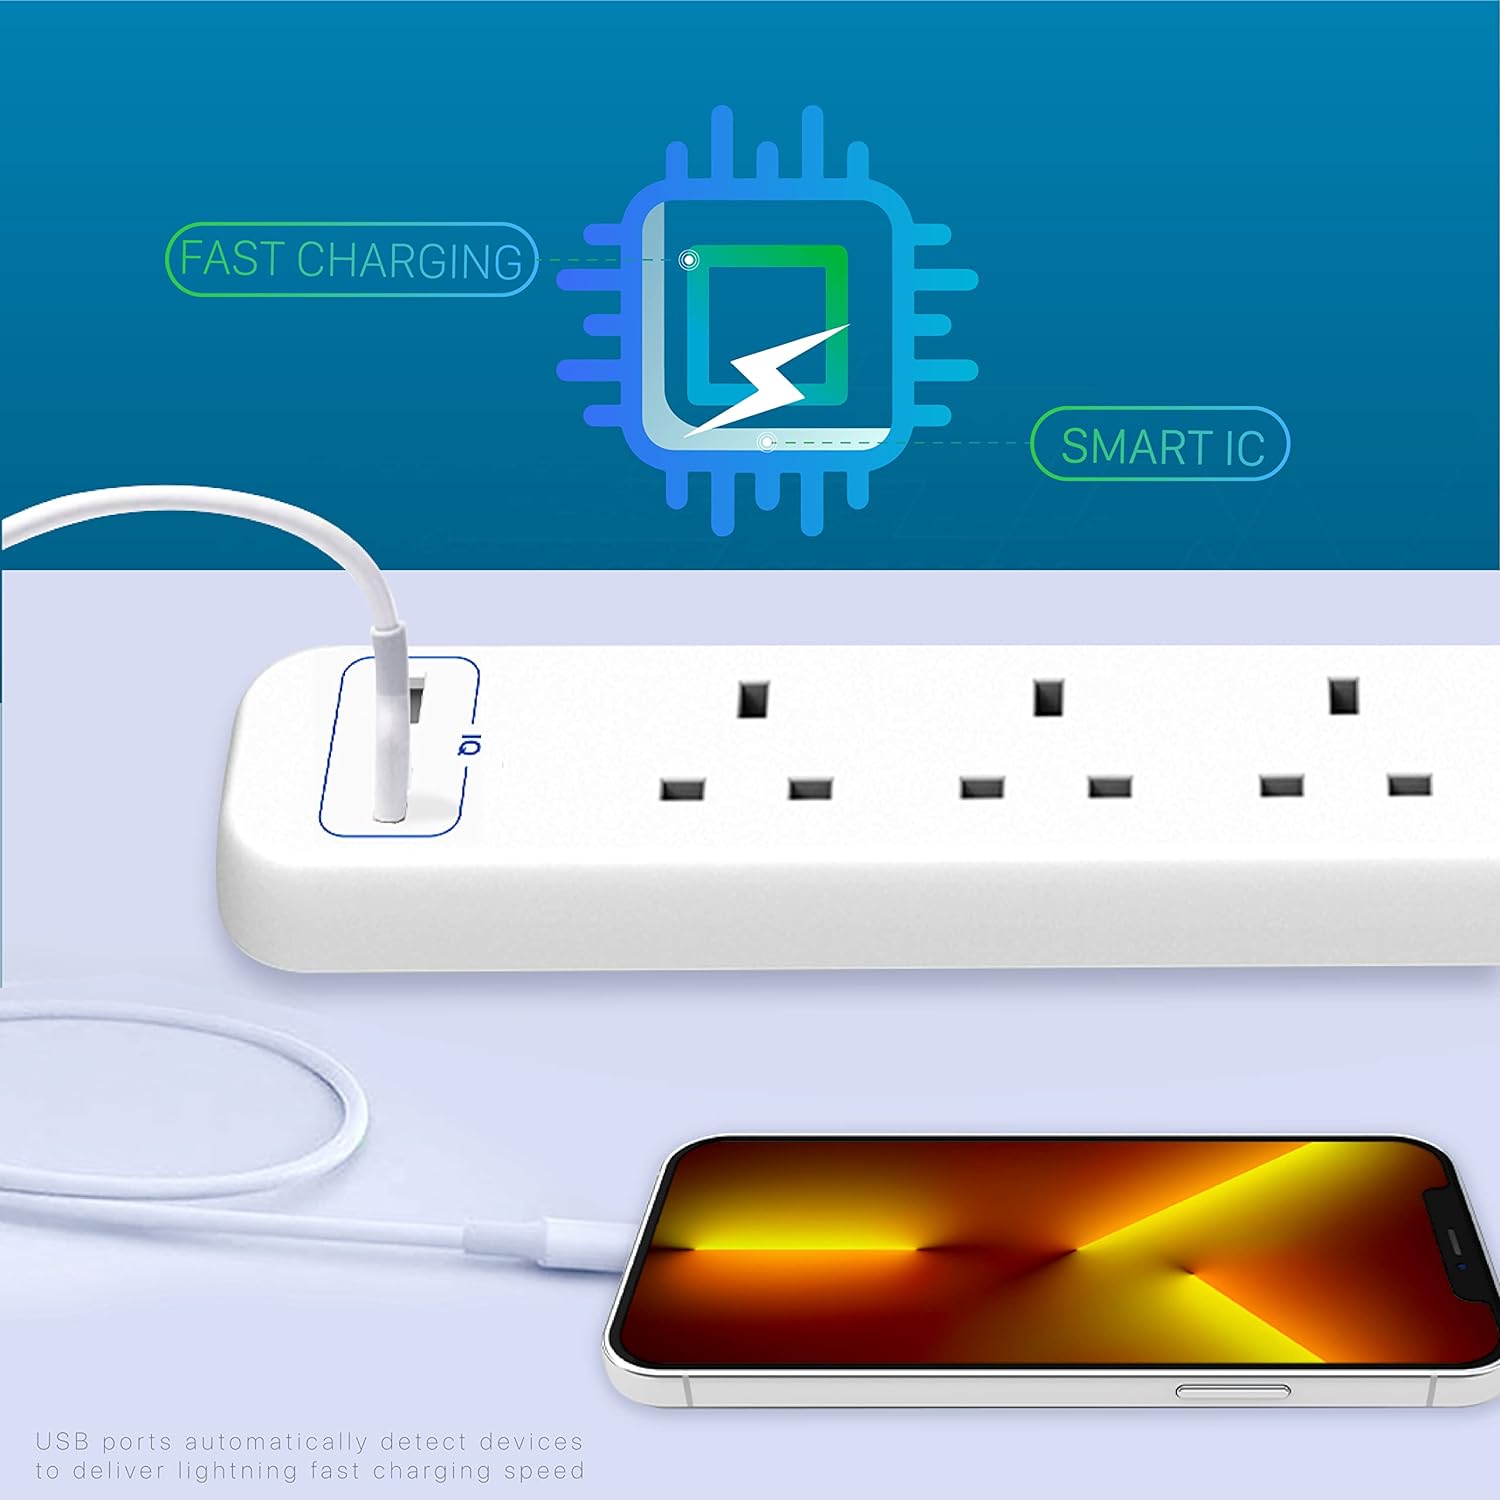 Remson Essential 6 Way 2 USB Ports + 4 AC Outlets Fast Charging Surge Protection 13A Power Strip - White